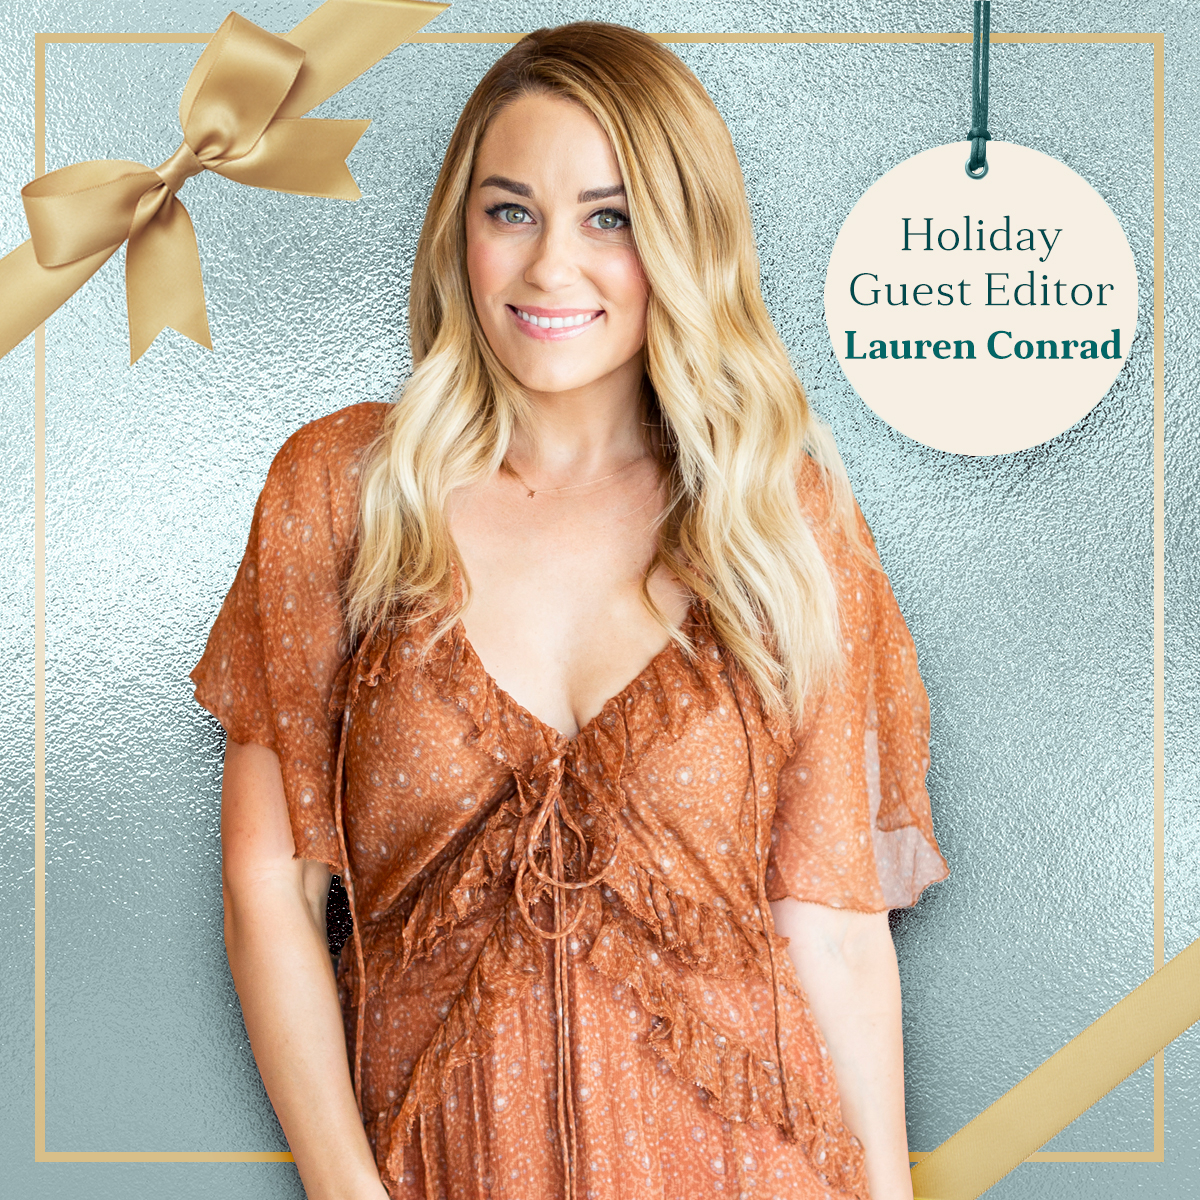 Lauren Conrad dazzles in new Christmas campaign for Kohl's